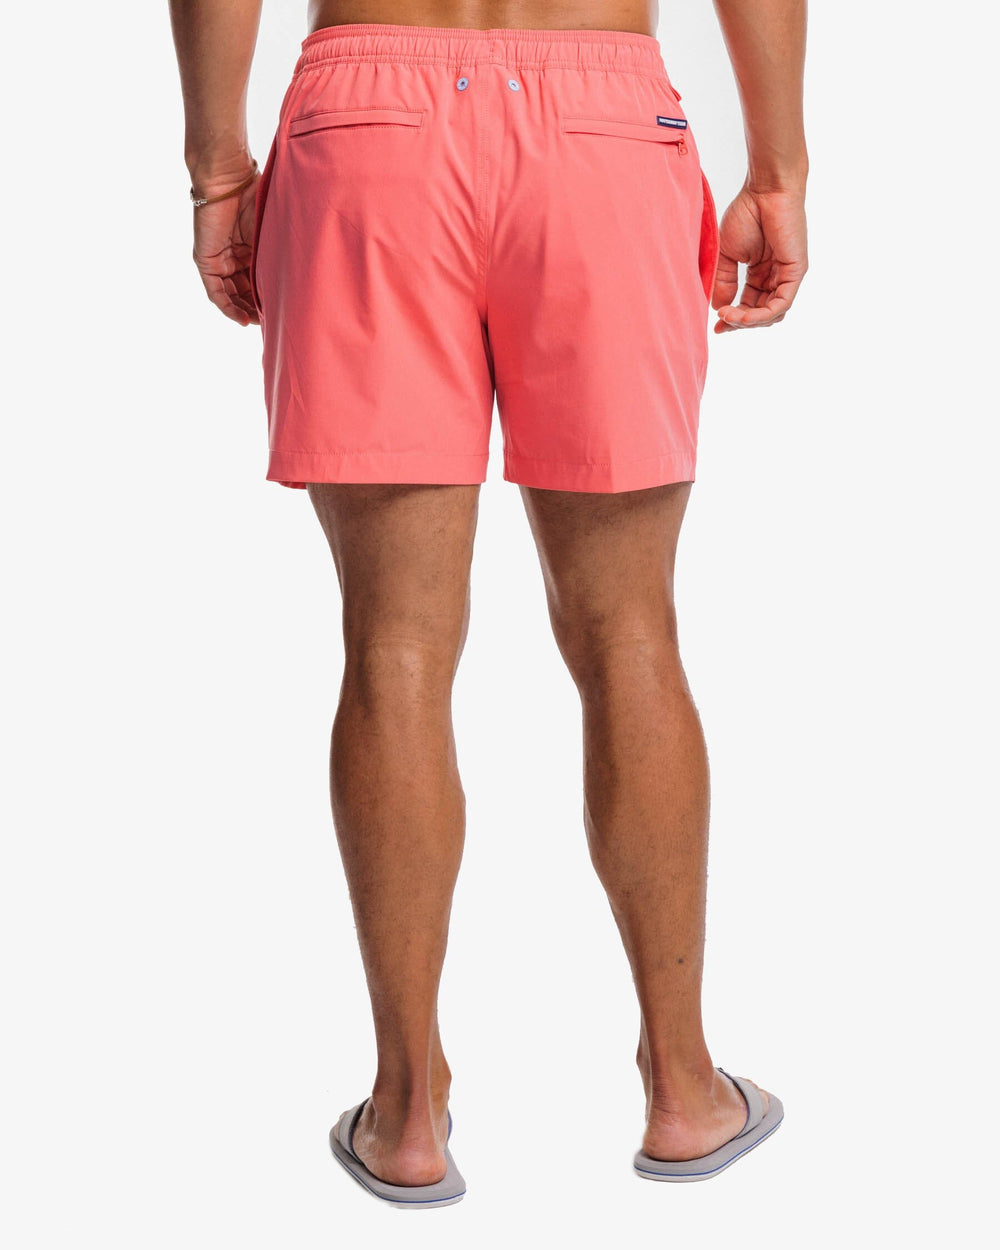 The back view of the Southern Tide Solid Swim Trunk 3 by Southern Tide - Sunkist Coral